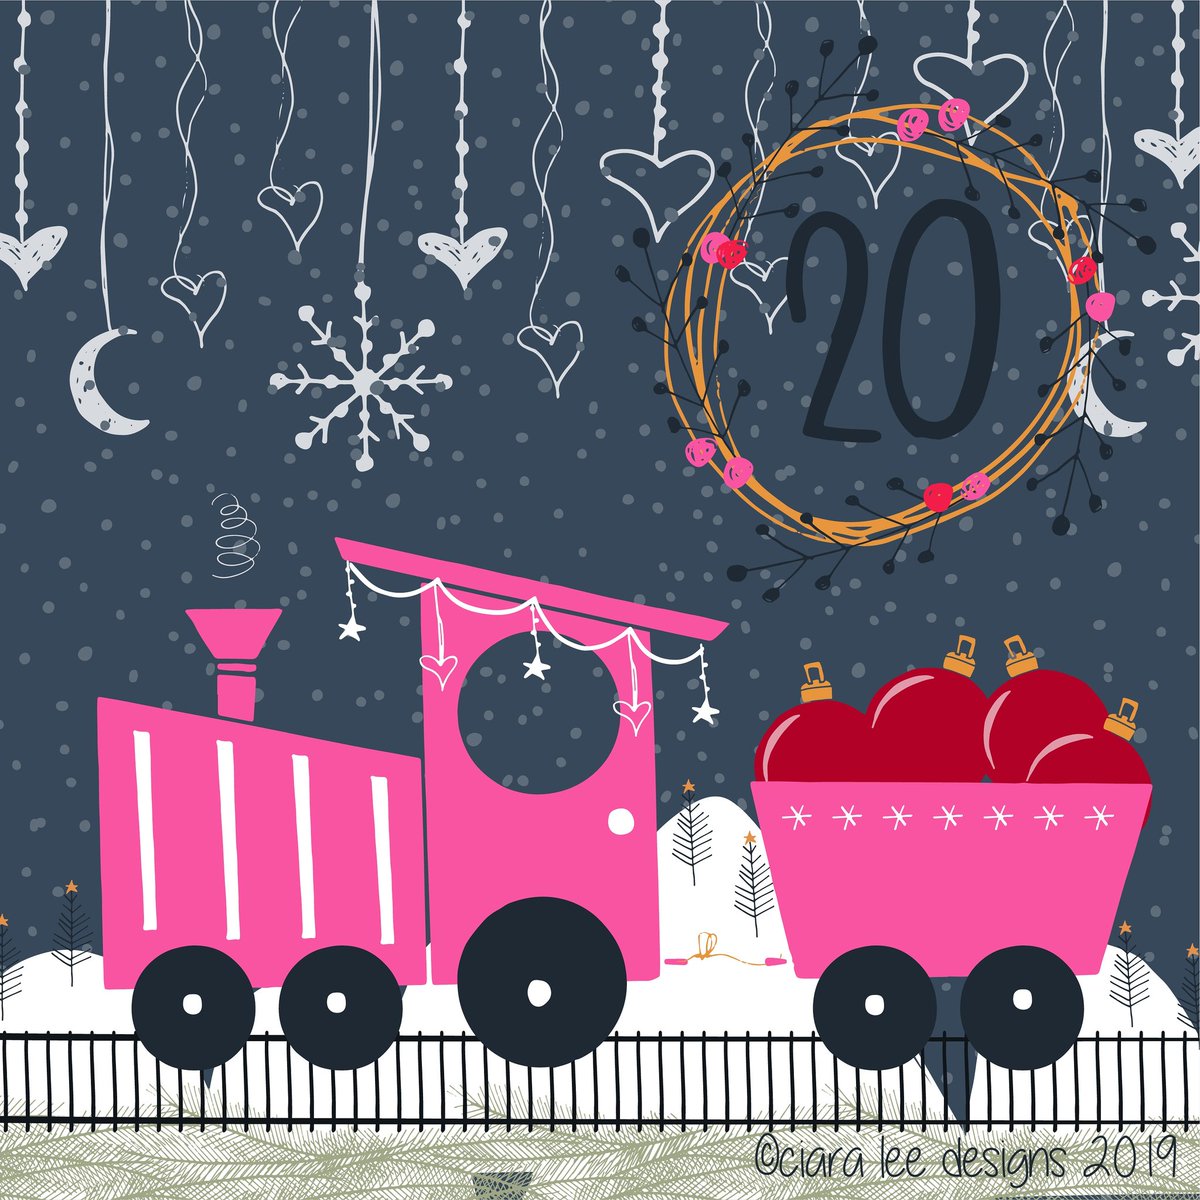 Day 20. Toot toot!! Baubles to be delivered!! #christmascountdown #adventcalendar #christmasillustration #handdrawn #festive #december #makeitindesign #staycolorfullycreative #surfacepatternlife #patternobserver #surfacedesign #seasonal